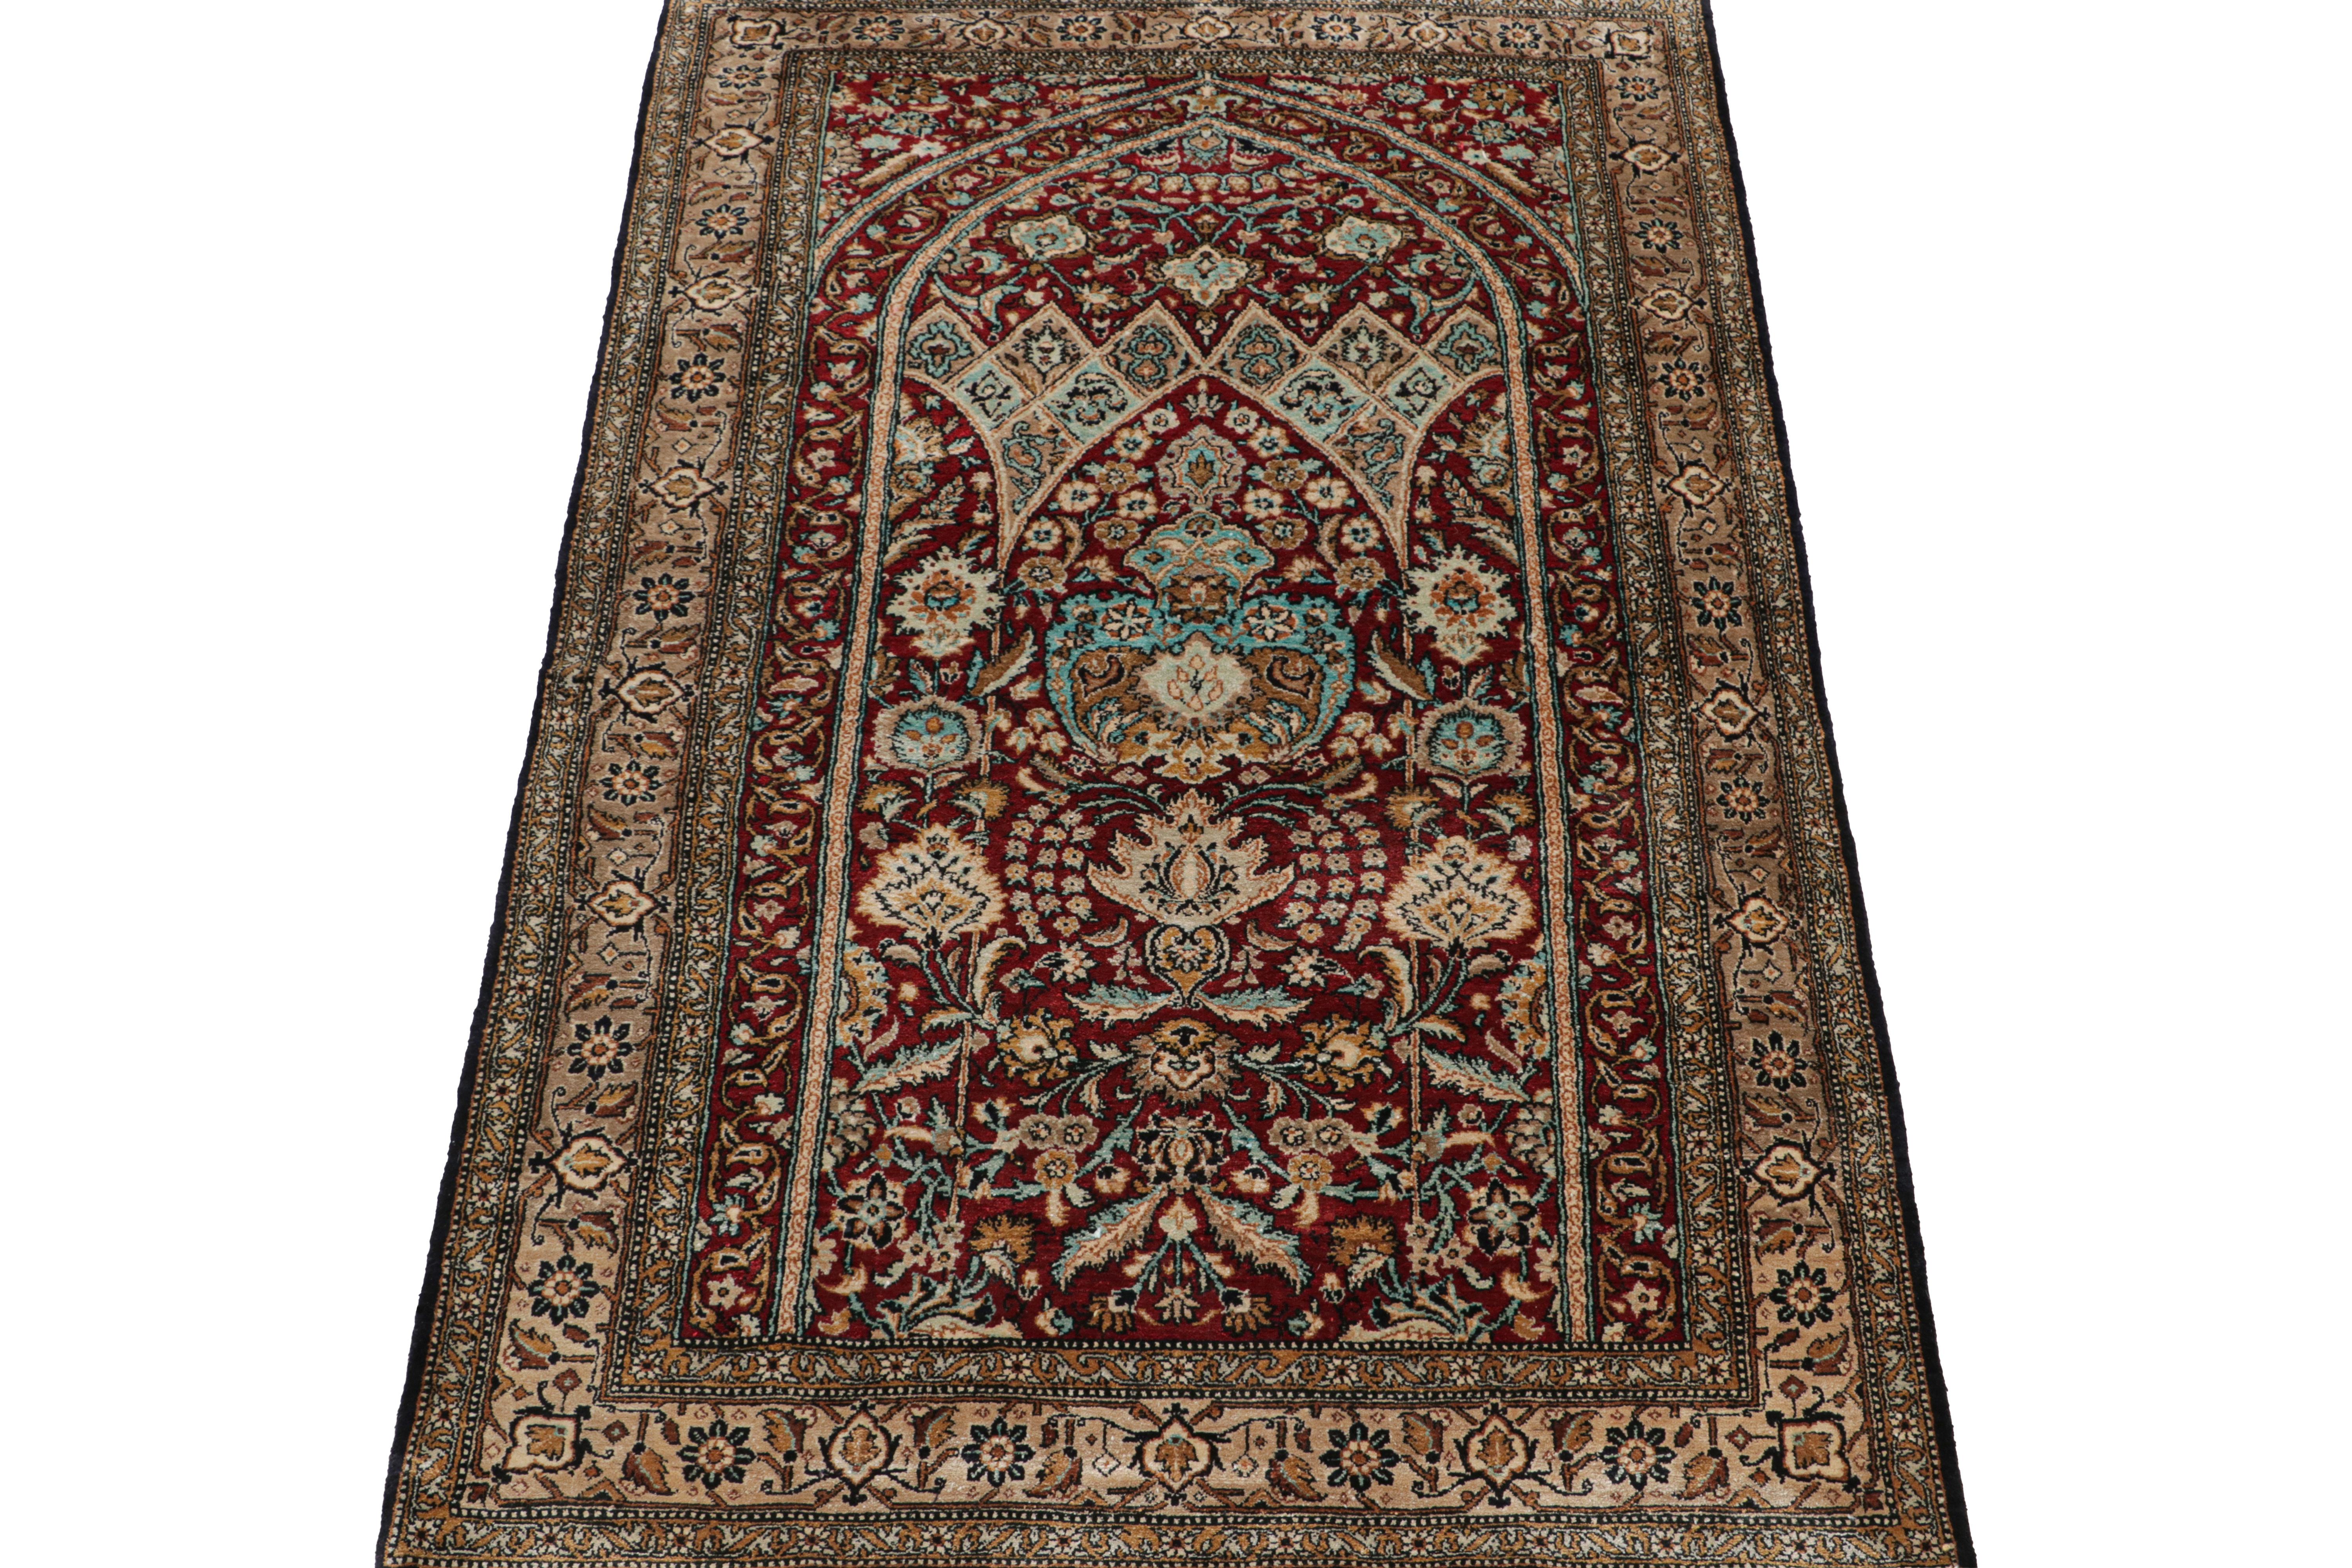 Hand-knotted in silk circa 1920-1930, this 3×4 antique Persian rug is a rare piece of Qum provenance—an exciting new curation from Rug & Kilim.

On the Design:

A rich red field and beige-brown border underscore the most regal floral patterns,